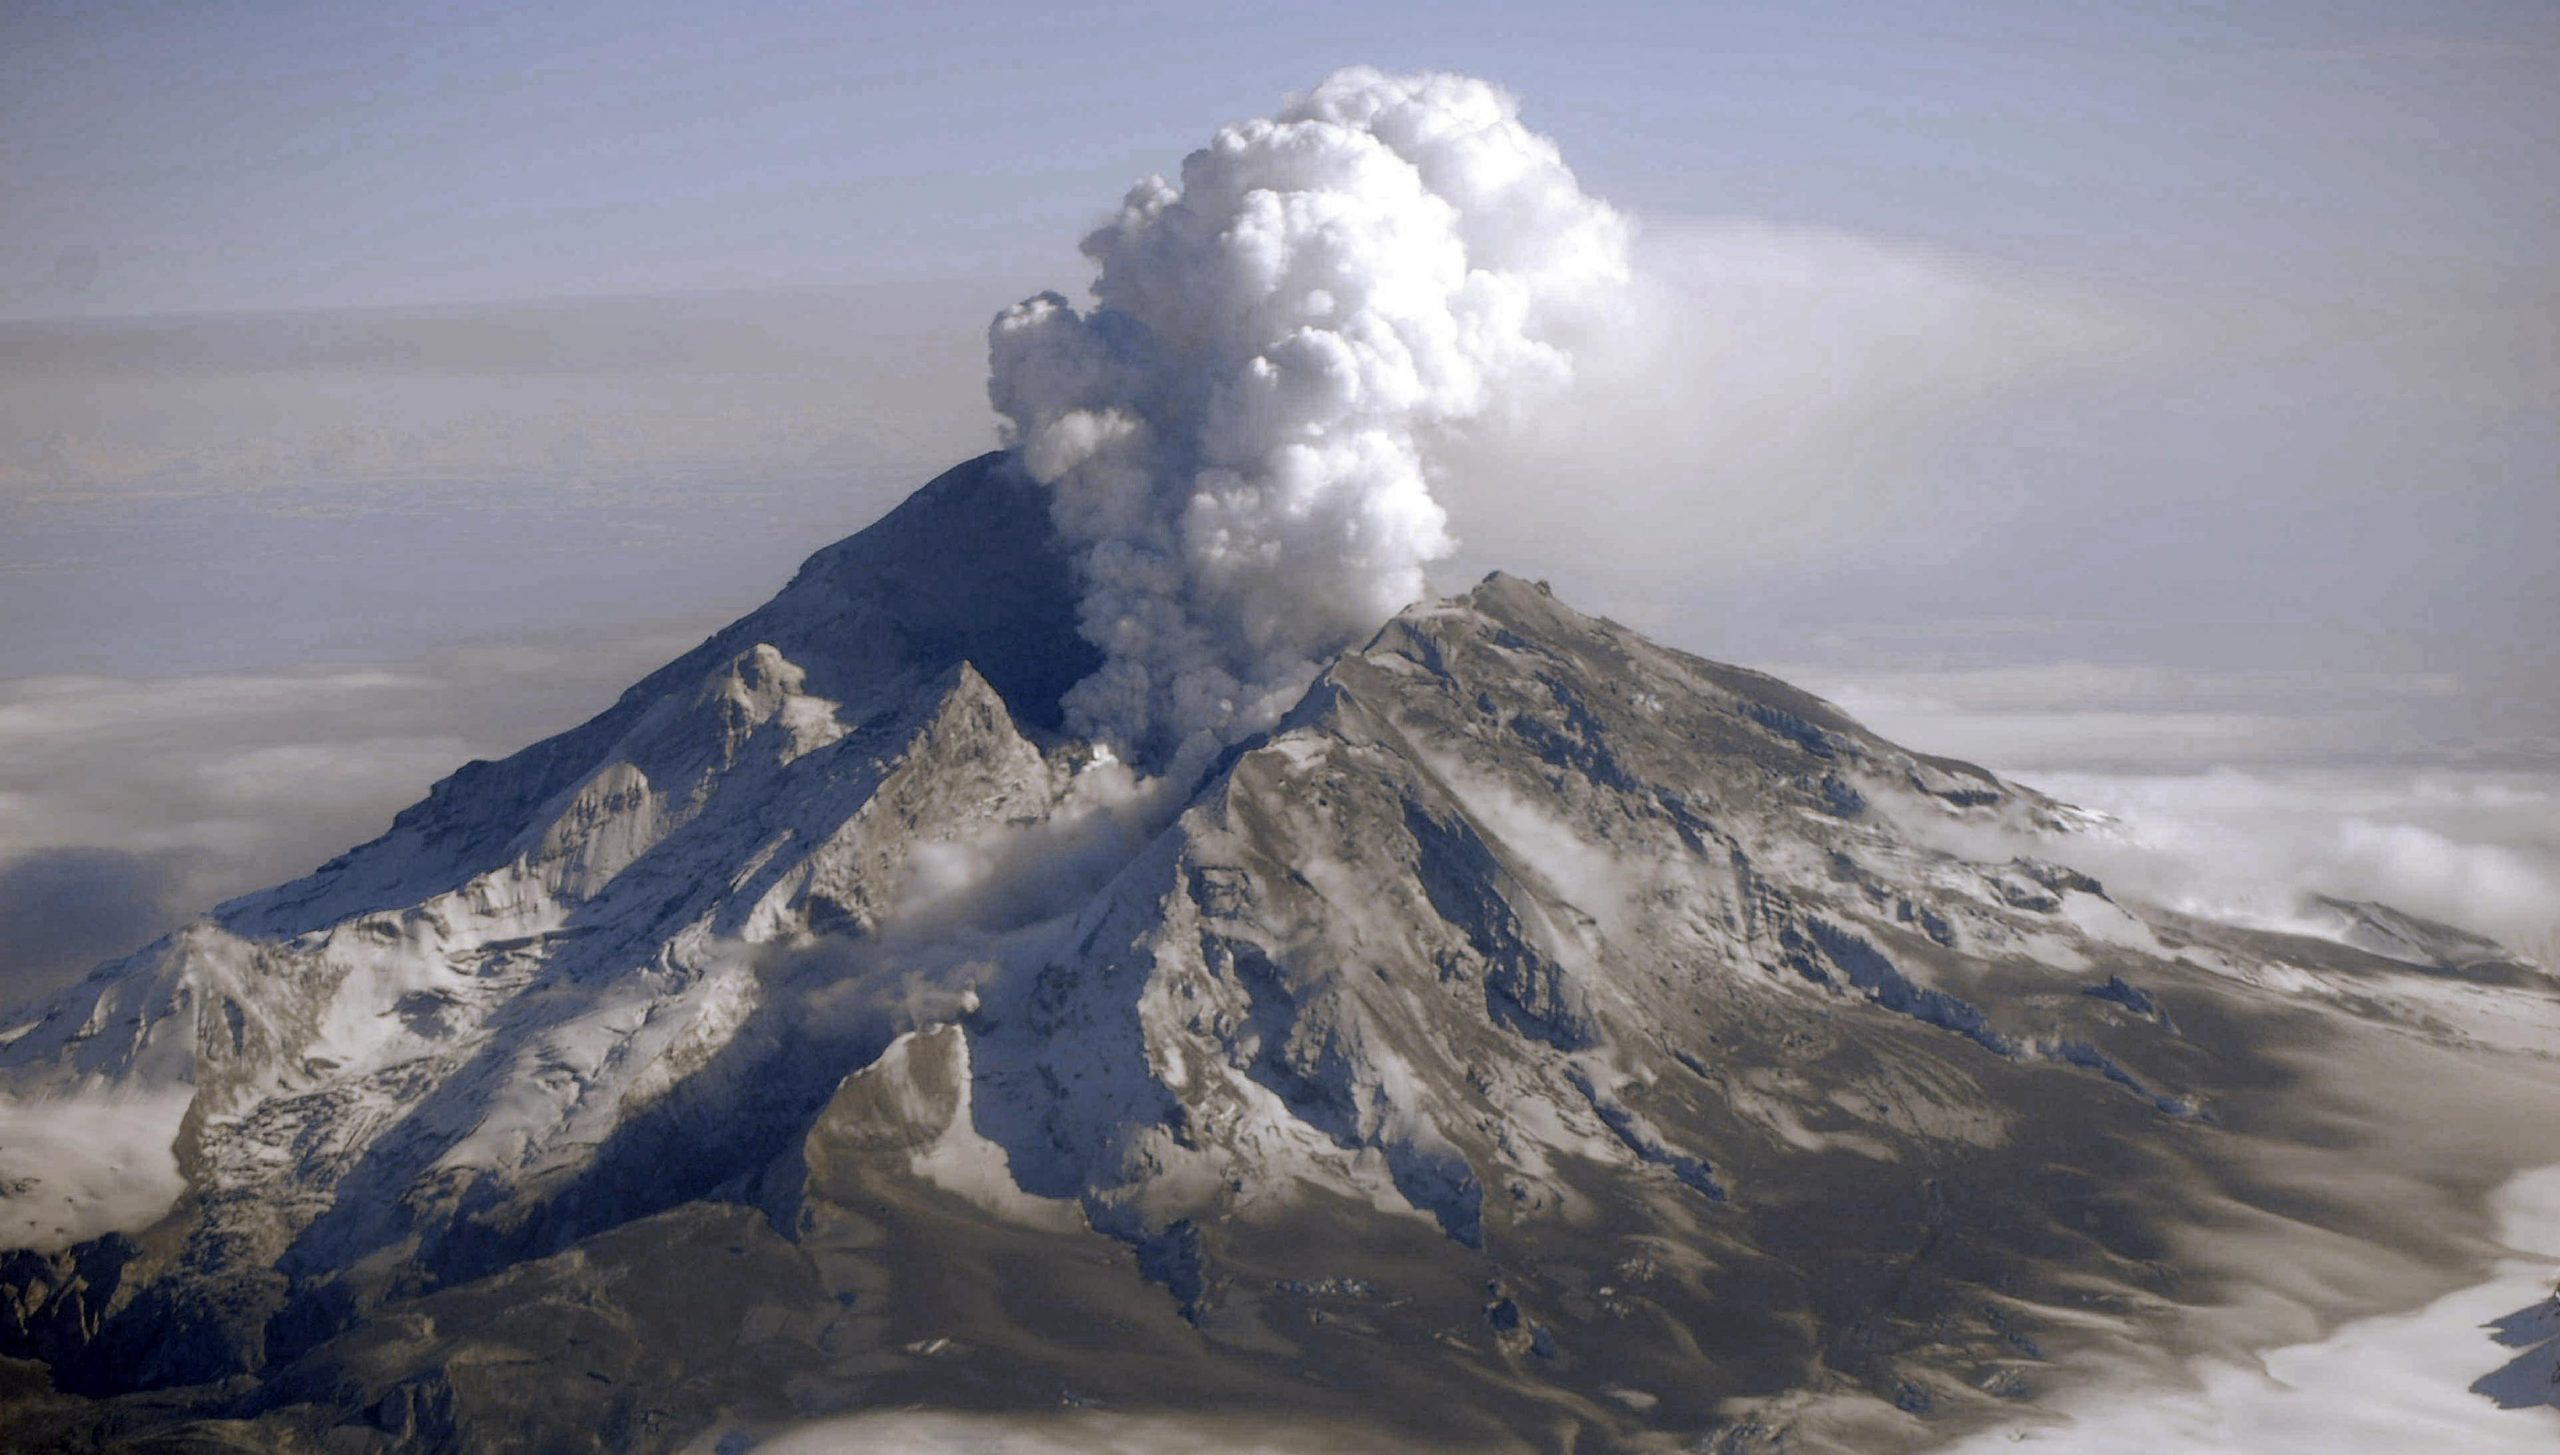 NASA Satellites Detect Signs of Unrest Years Before Volcanic Eruptions - SciTechDaily